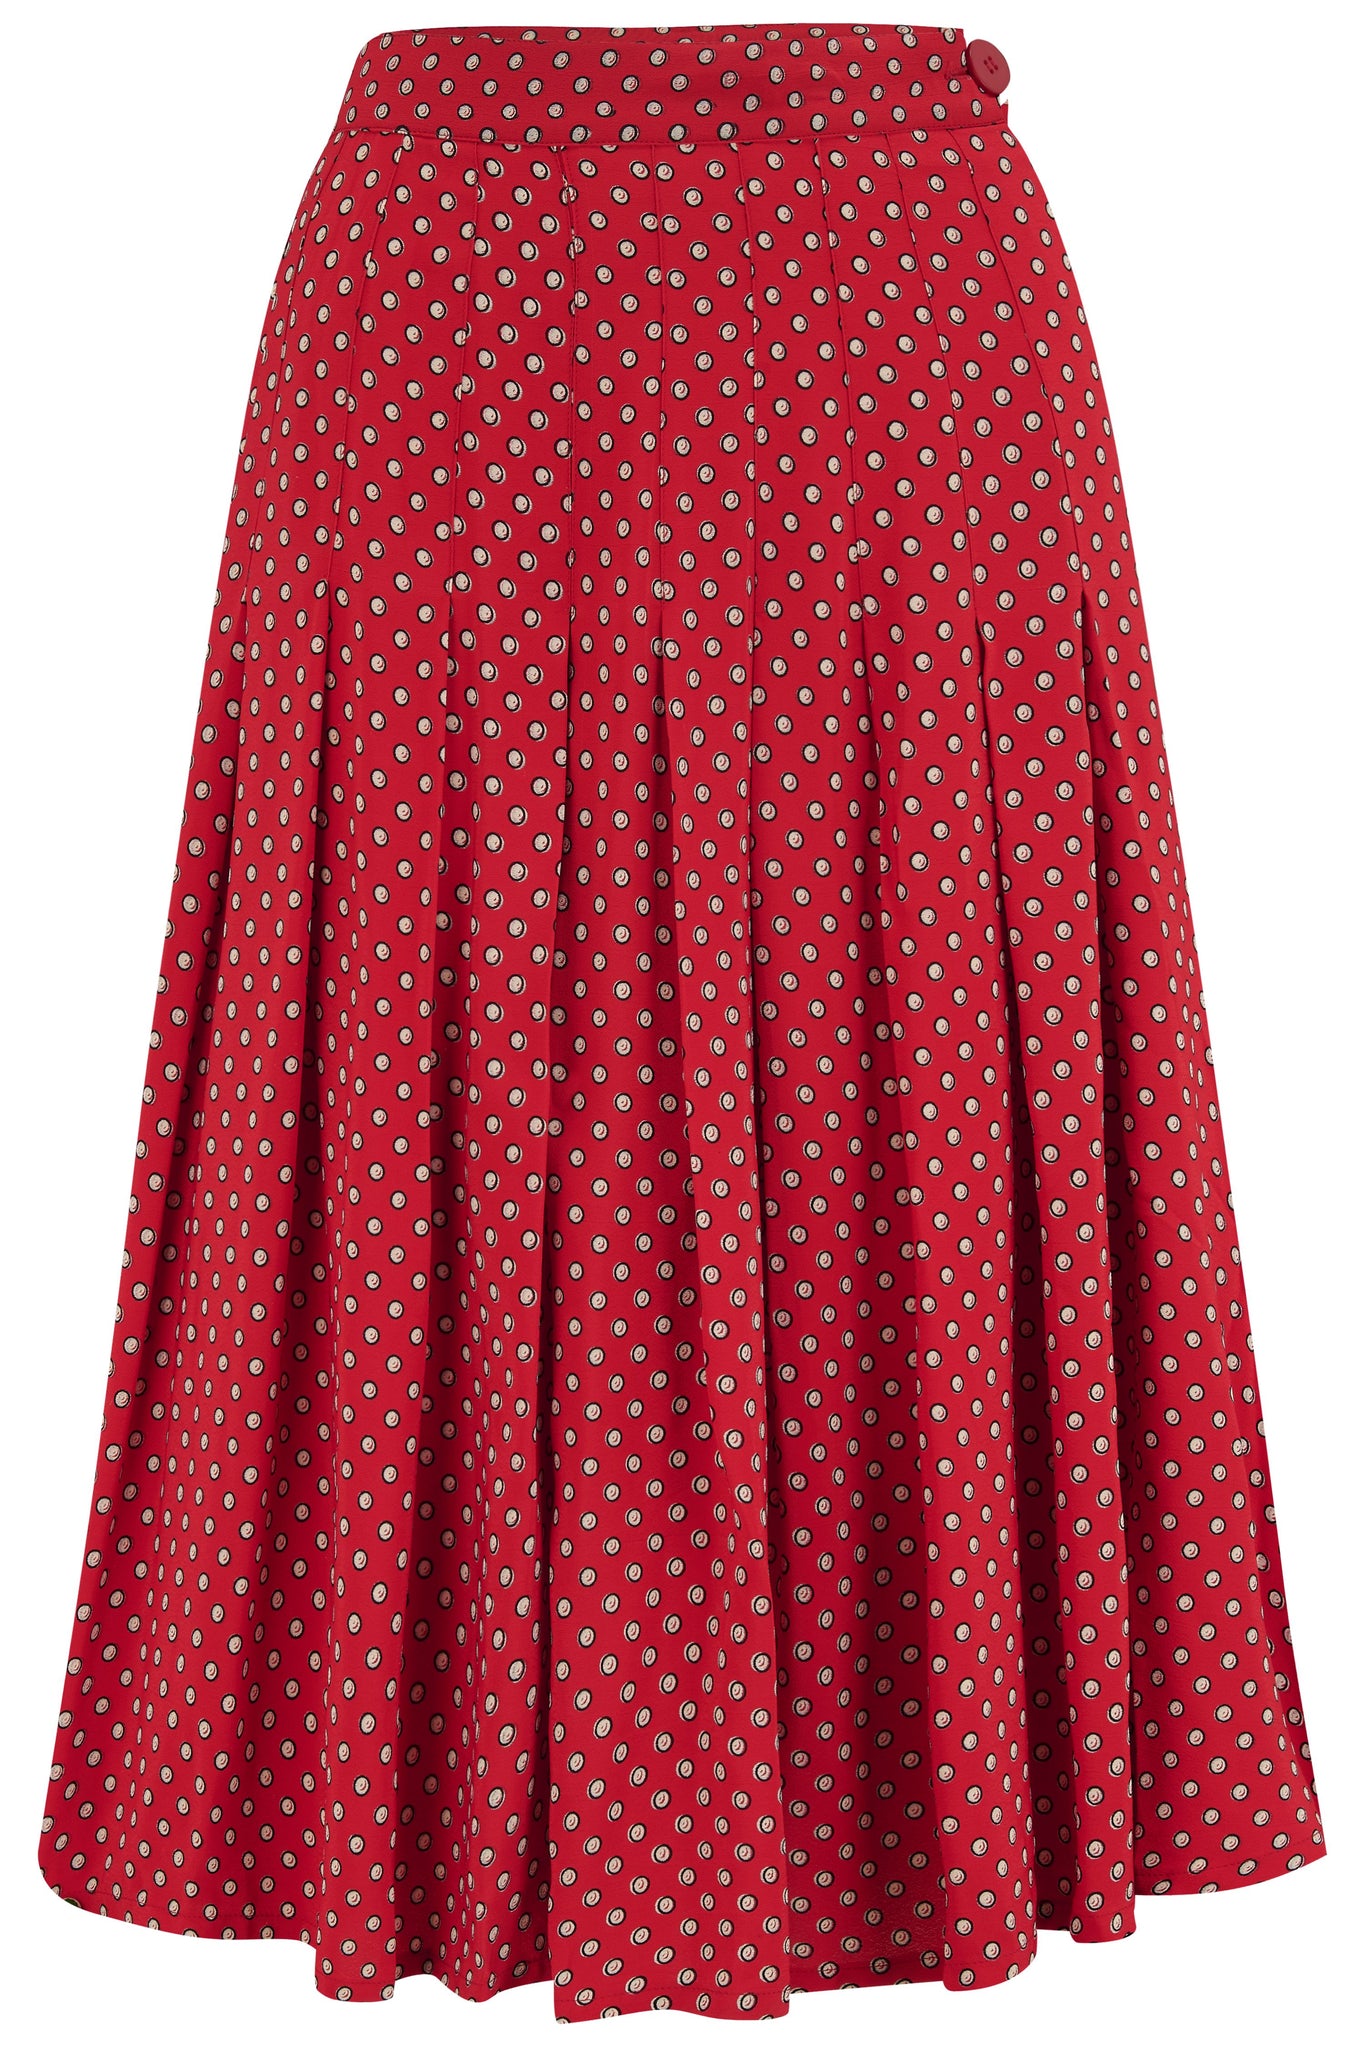 The "Lucille" Pleated Skirt in Red Ditzy Dot, Classic & Authentic 1940s Vintage Inspired Style - True and authentic vintage style clothing, inspired by the Classic styles of CC41 , WW2 and the fun 1950s RocknRoll era, for everyday wear plus events like Goodwood Revival, Twinwood Festival and Viva Las Vegas Rockabilly Weekend Rock n Romance The Seamstress Of Bloomsbury